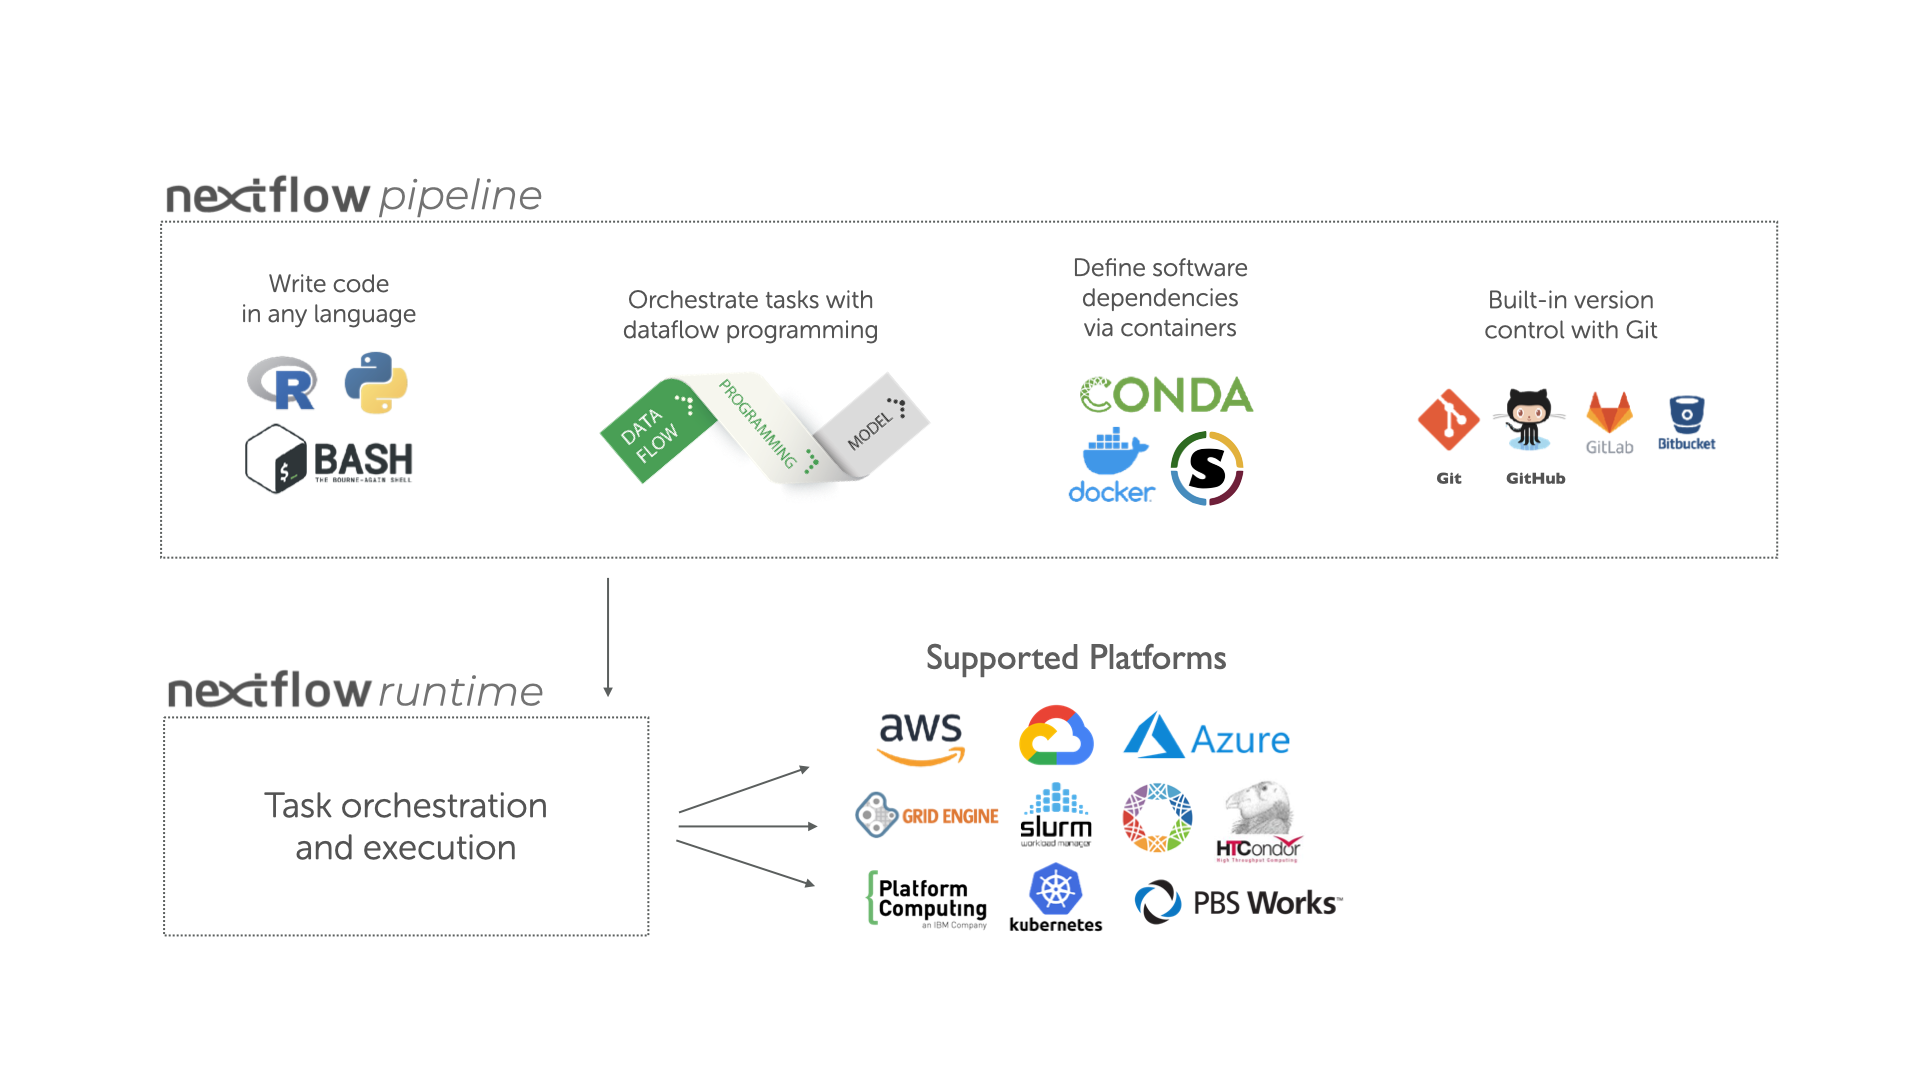 Infographic illustrating the components and supported platforms of a nextflow pipeline. The top section 'nextflow pipeline' is divided into three: writing code in any language (represented by R, Python, and Bash icons), orchestrating tasks with dataflow programming (represented by papers marked 'Data Flow' and 'Programming Model'), and defining software dependencies via containers (represented by Conda, Docker, and Singularity icons) and built-in version control with Git (represented by Git, GitHub, GitLab, and Bitbucket icons). Below, in the 'nextflow runtime' section, is 'Task orchestration and execution'. Arrows point downwards to the 'Supported Platforms' section, showcasing various platforms such as AWS, Google Cloud, Azure, Grid Engine, Slurm, HTCondor, Platform Computing, Kubernetes, and PBS Works.